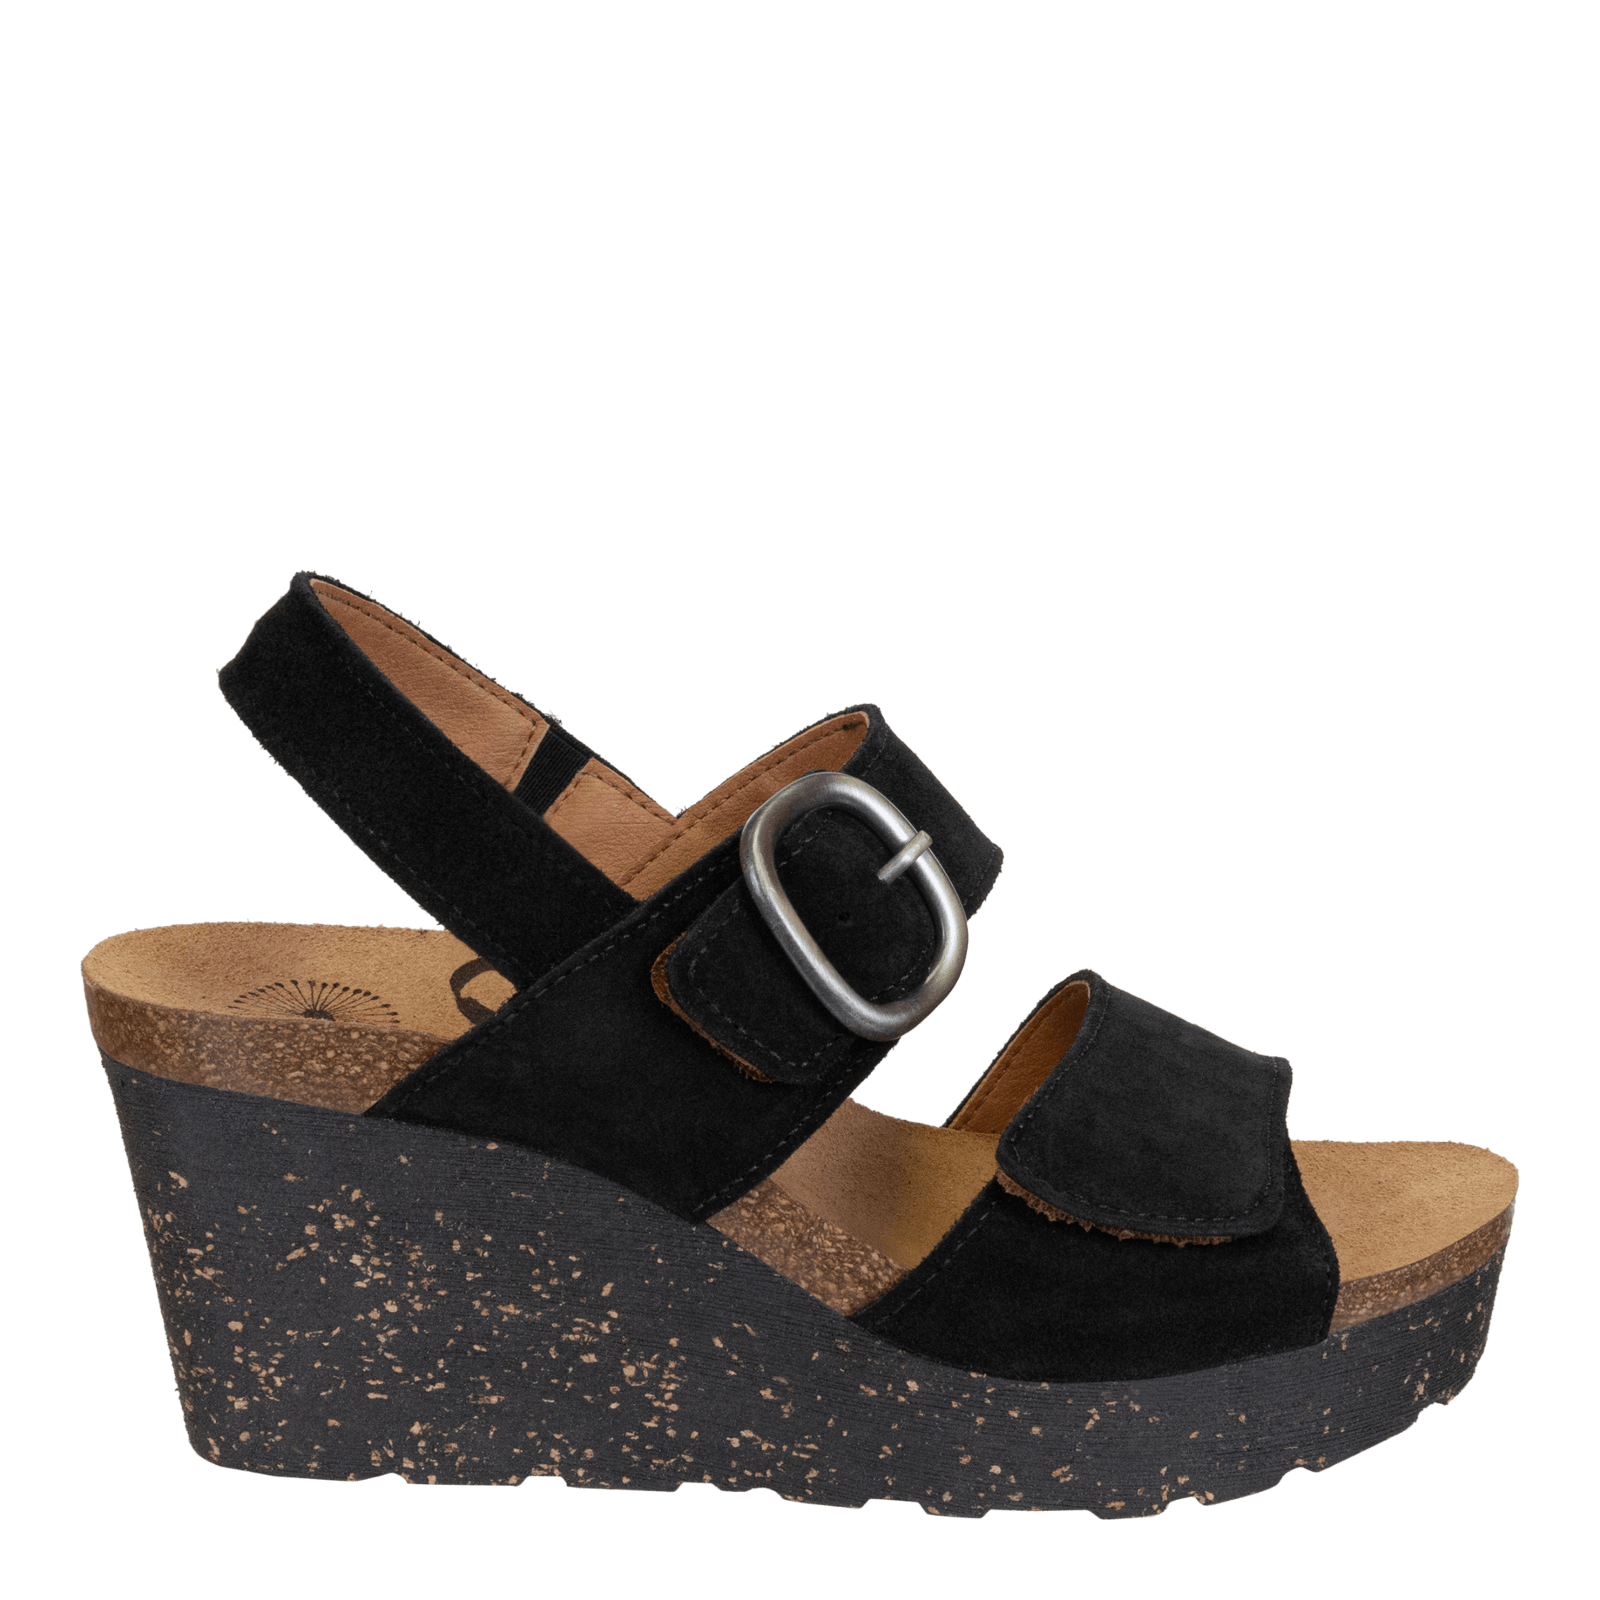 FLUENT in TAUPE Wedge Sandals - OTBT shoes